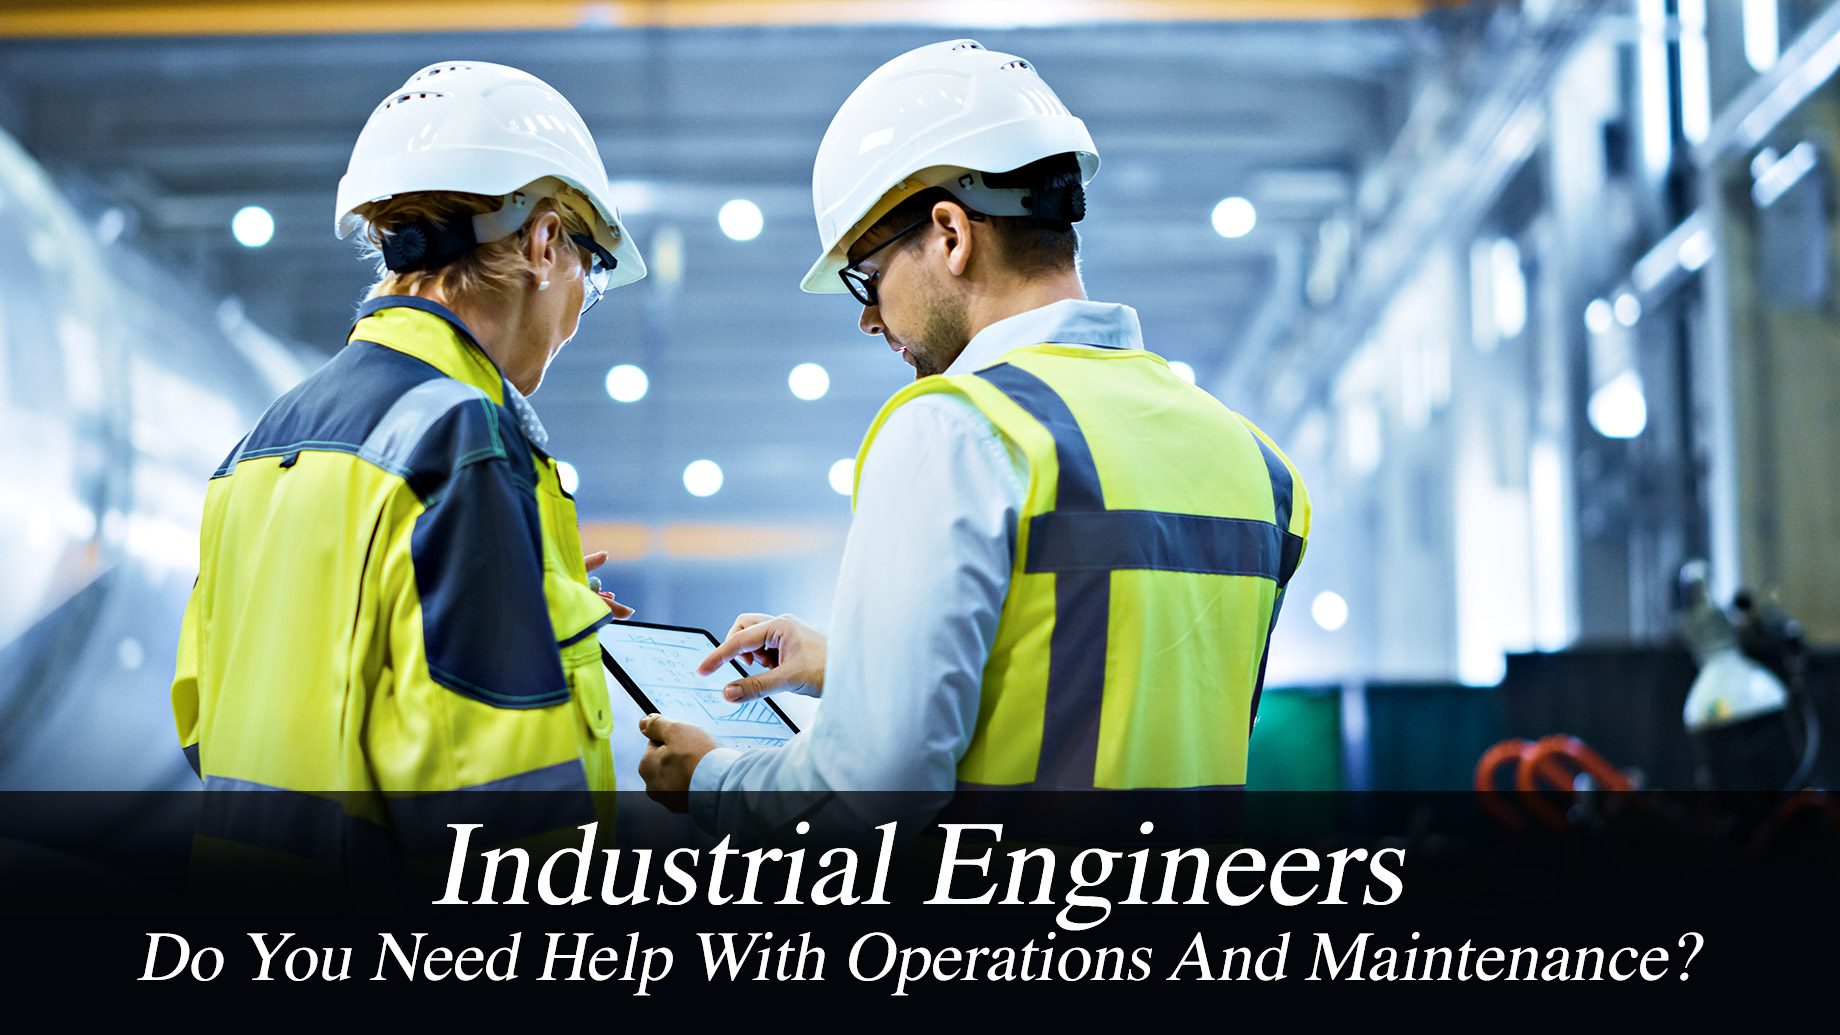 Industrial Engineers - Do You Need Help With Operations And Maintenance?